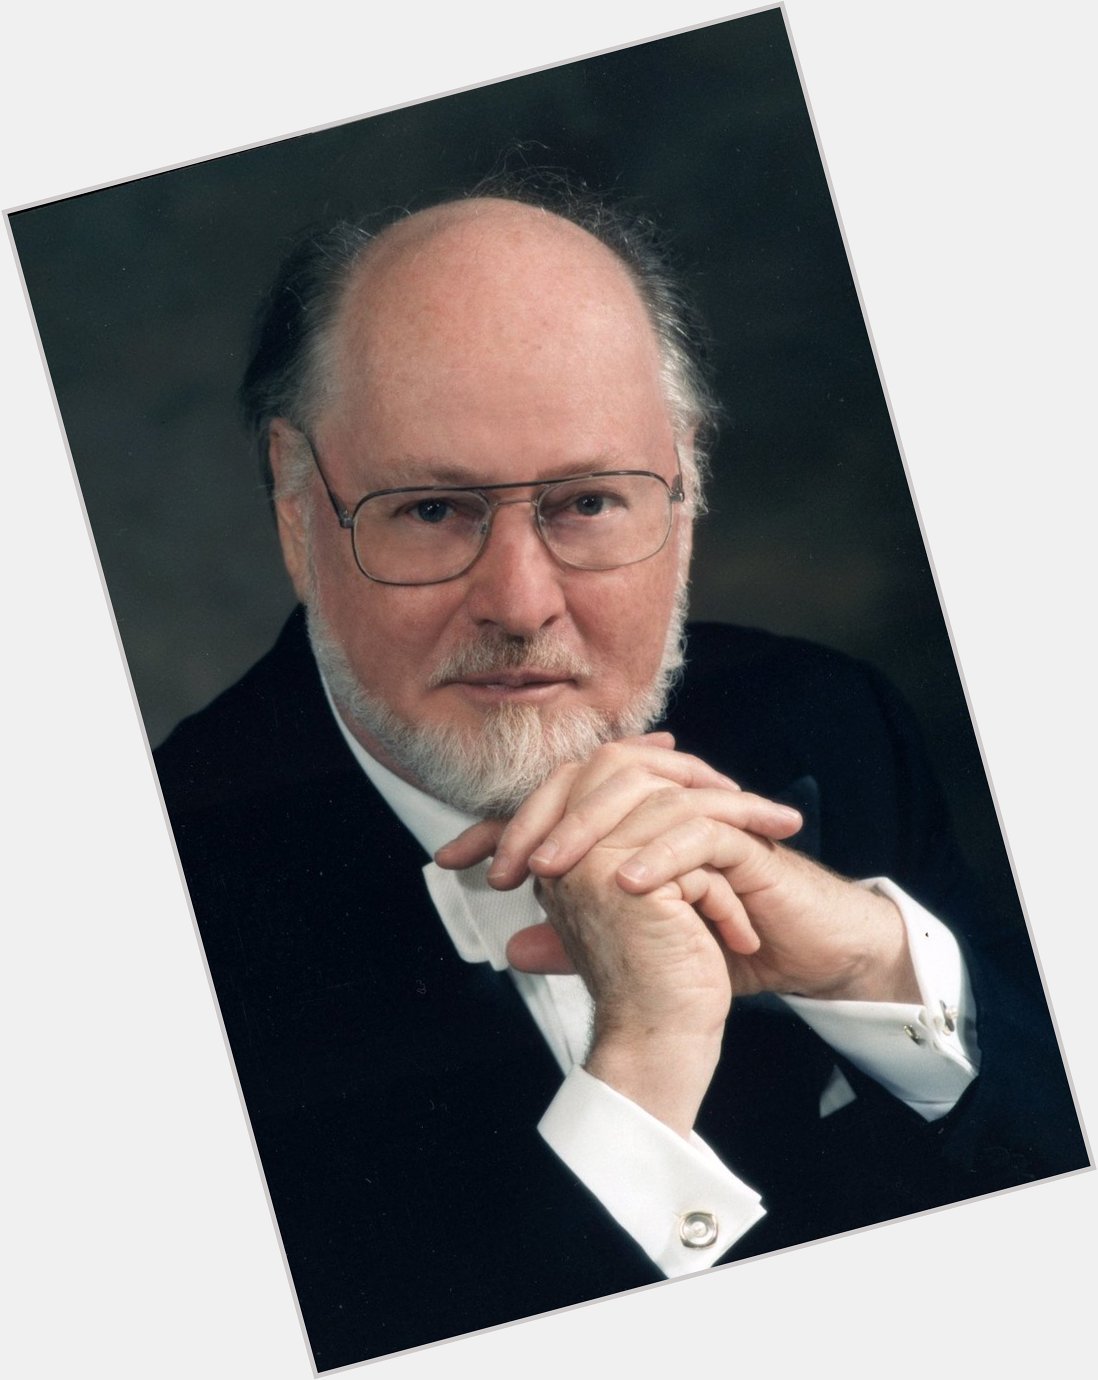 Happy belated birthday to John Williams!! You have and continue to feed our sense of wonderment and adventure! 